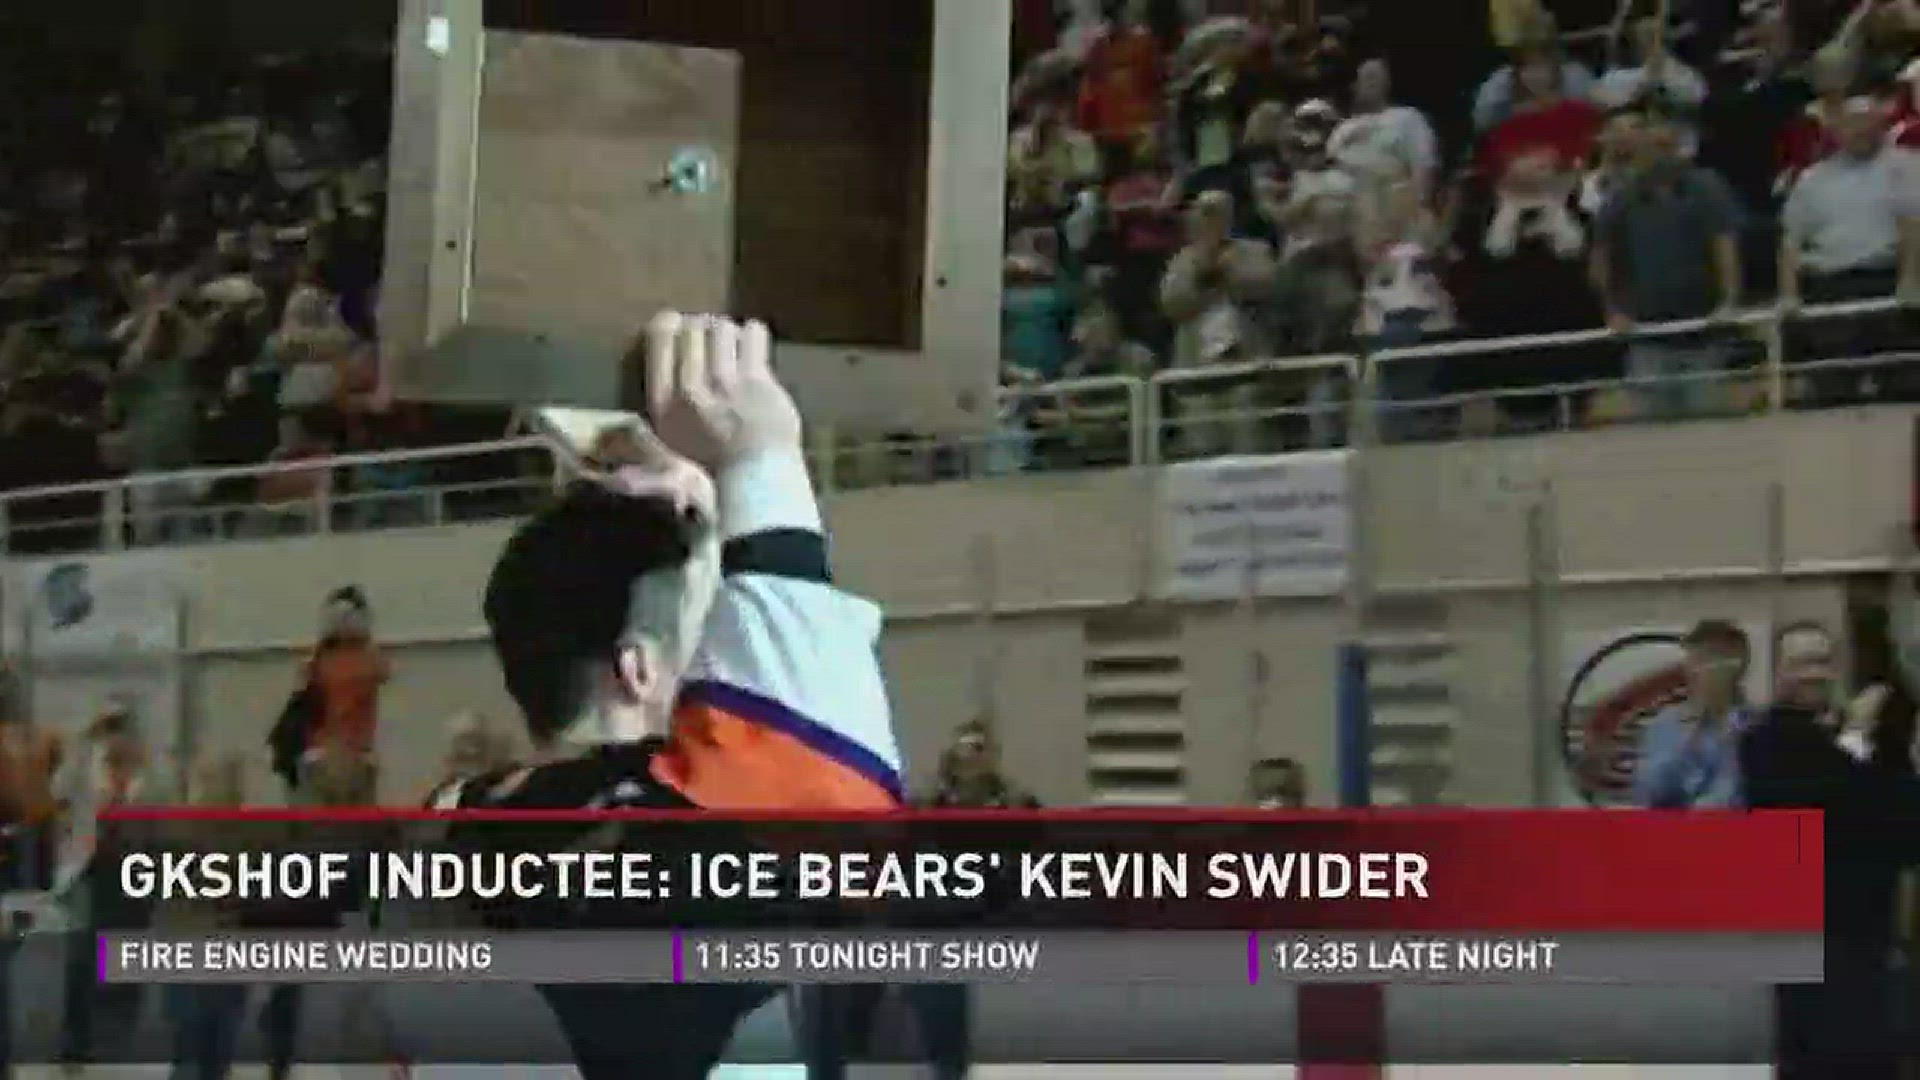 The first in our series of stories about the 2017 Greater Knoxville Sports Hall of Fame inductees. Kevin Swider led the Ice Bears to three SPHL Predsident's Cup championships and is the leagues all-time leader in points.